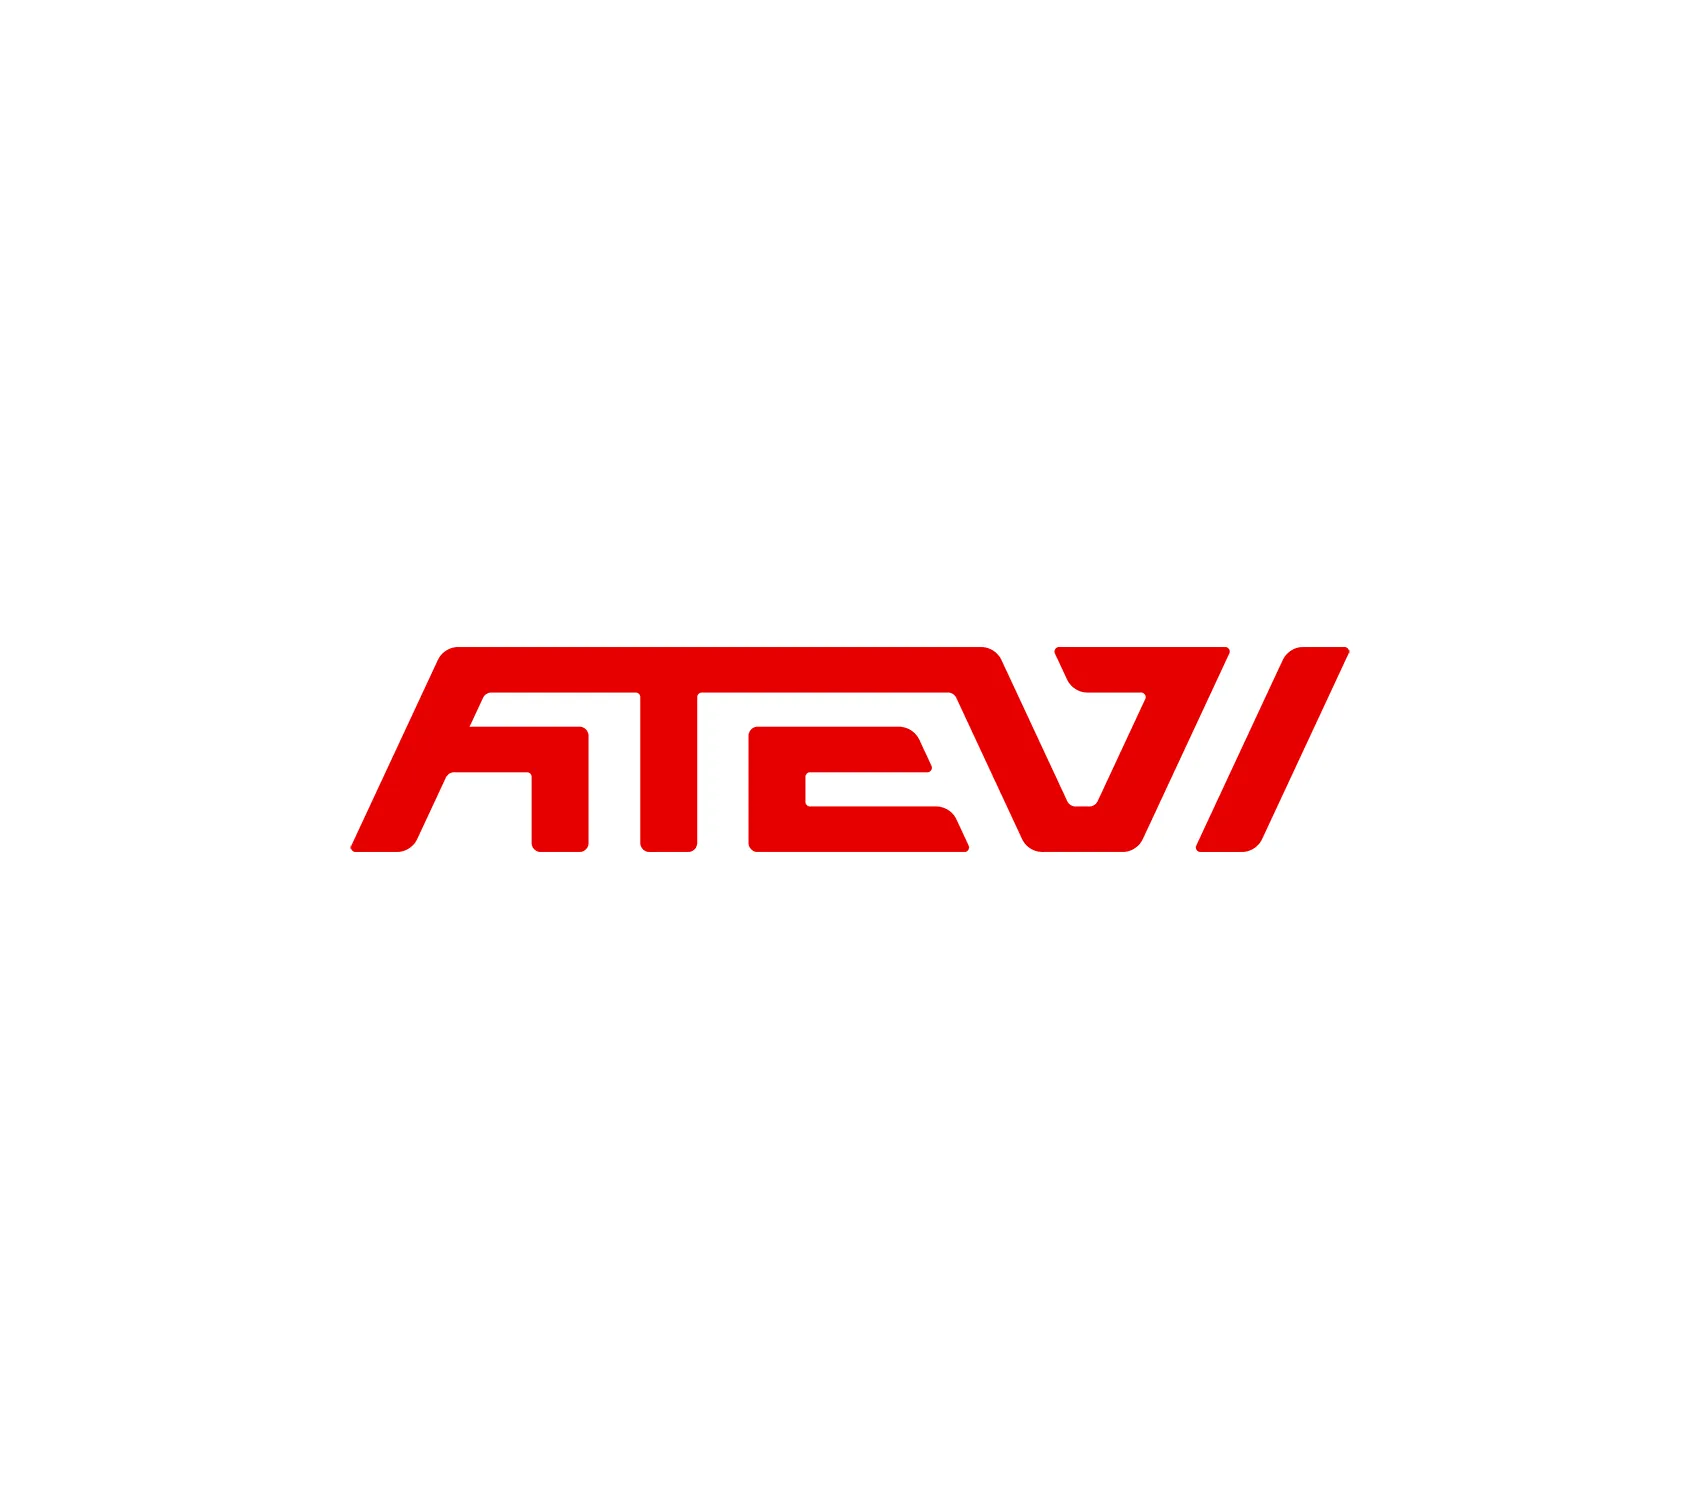 Atevi Systems